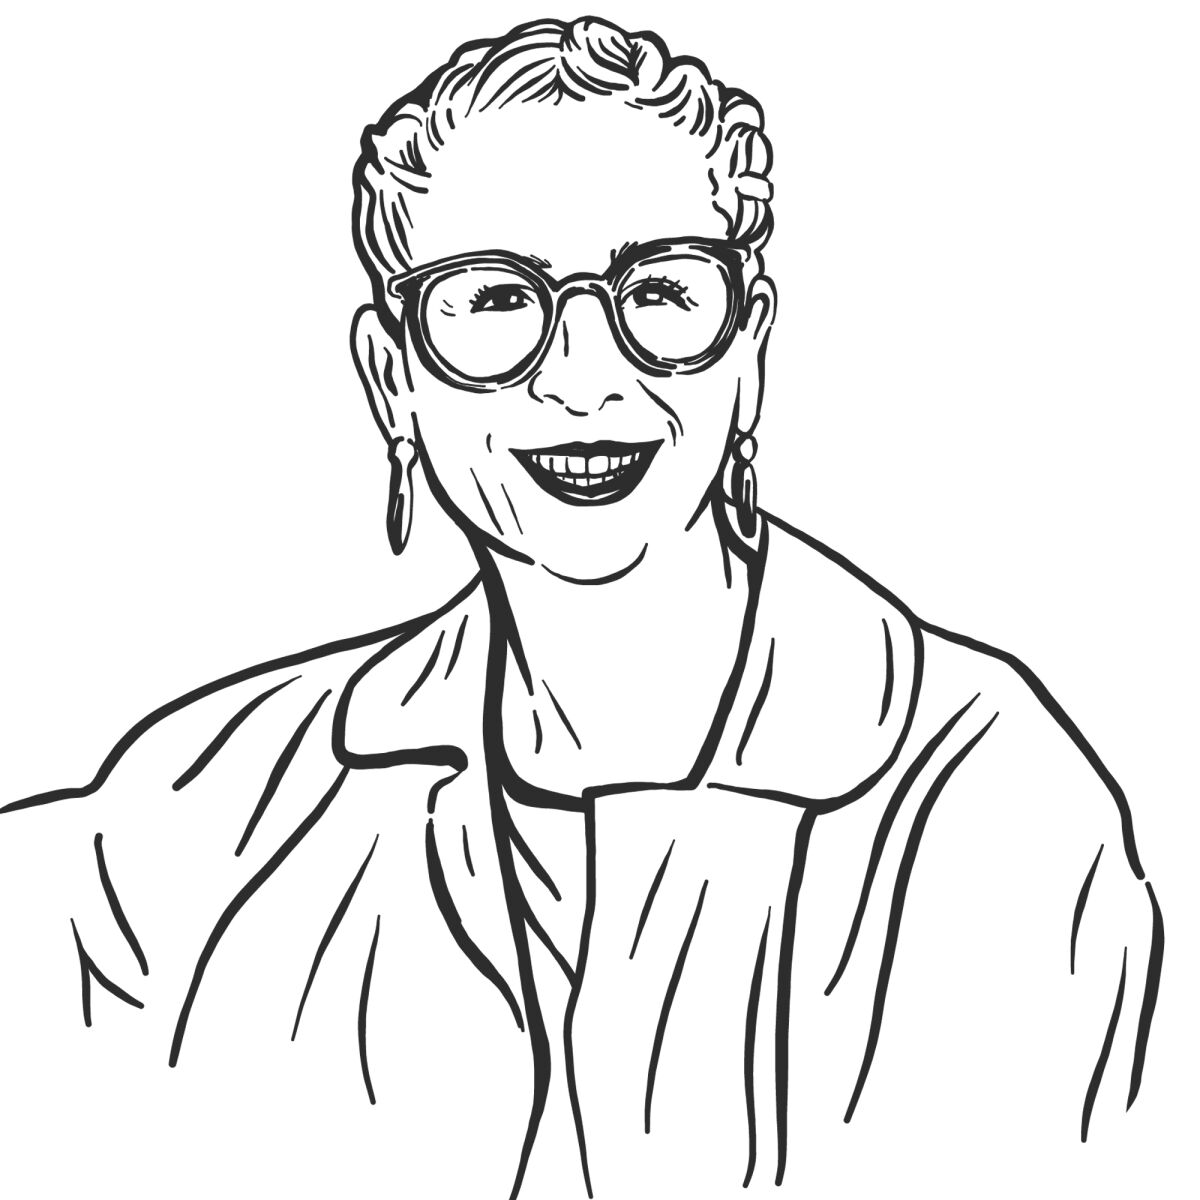 In 2014, Nancy Silverton won the James Beard Foundation’s Outstanding Chef award, the organization’s highest honor for a chef.